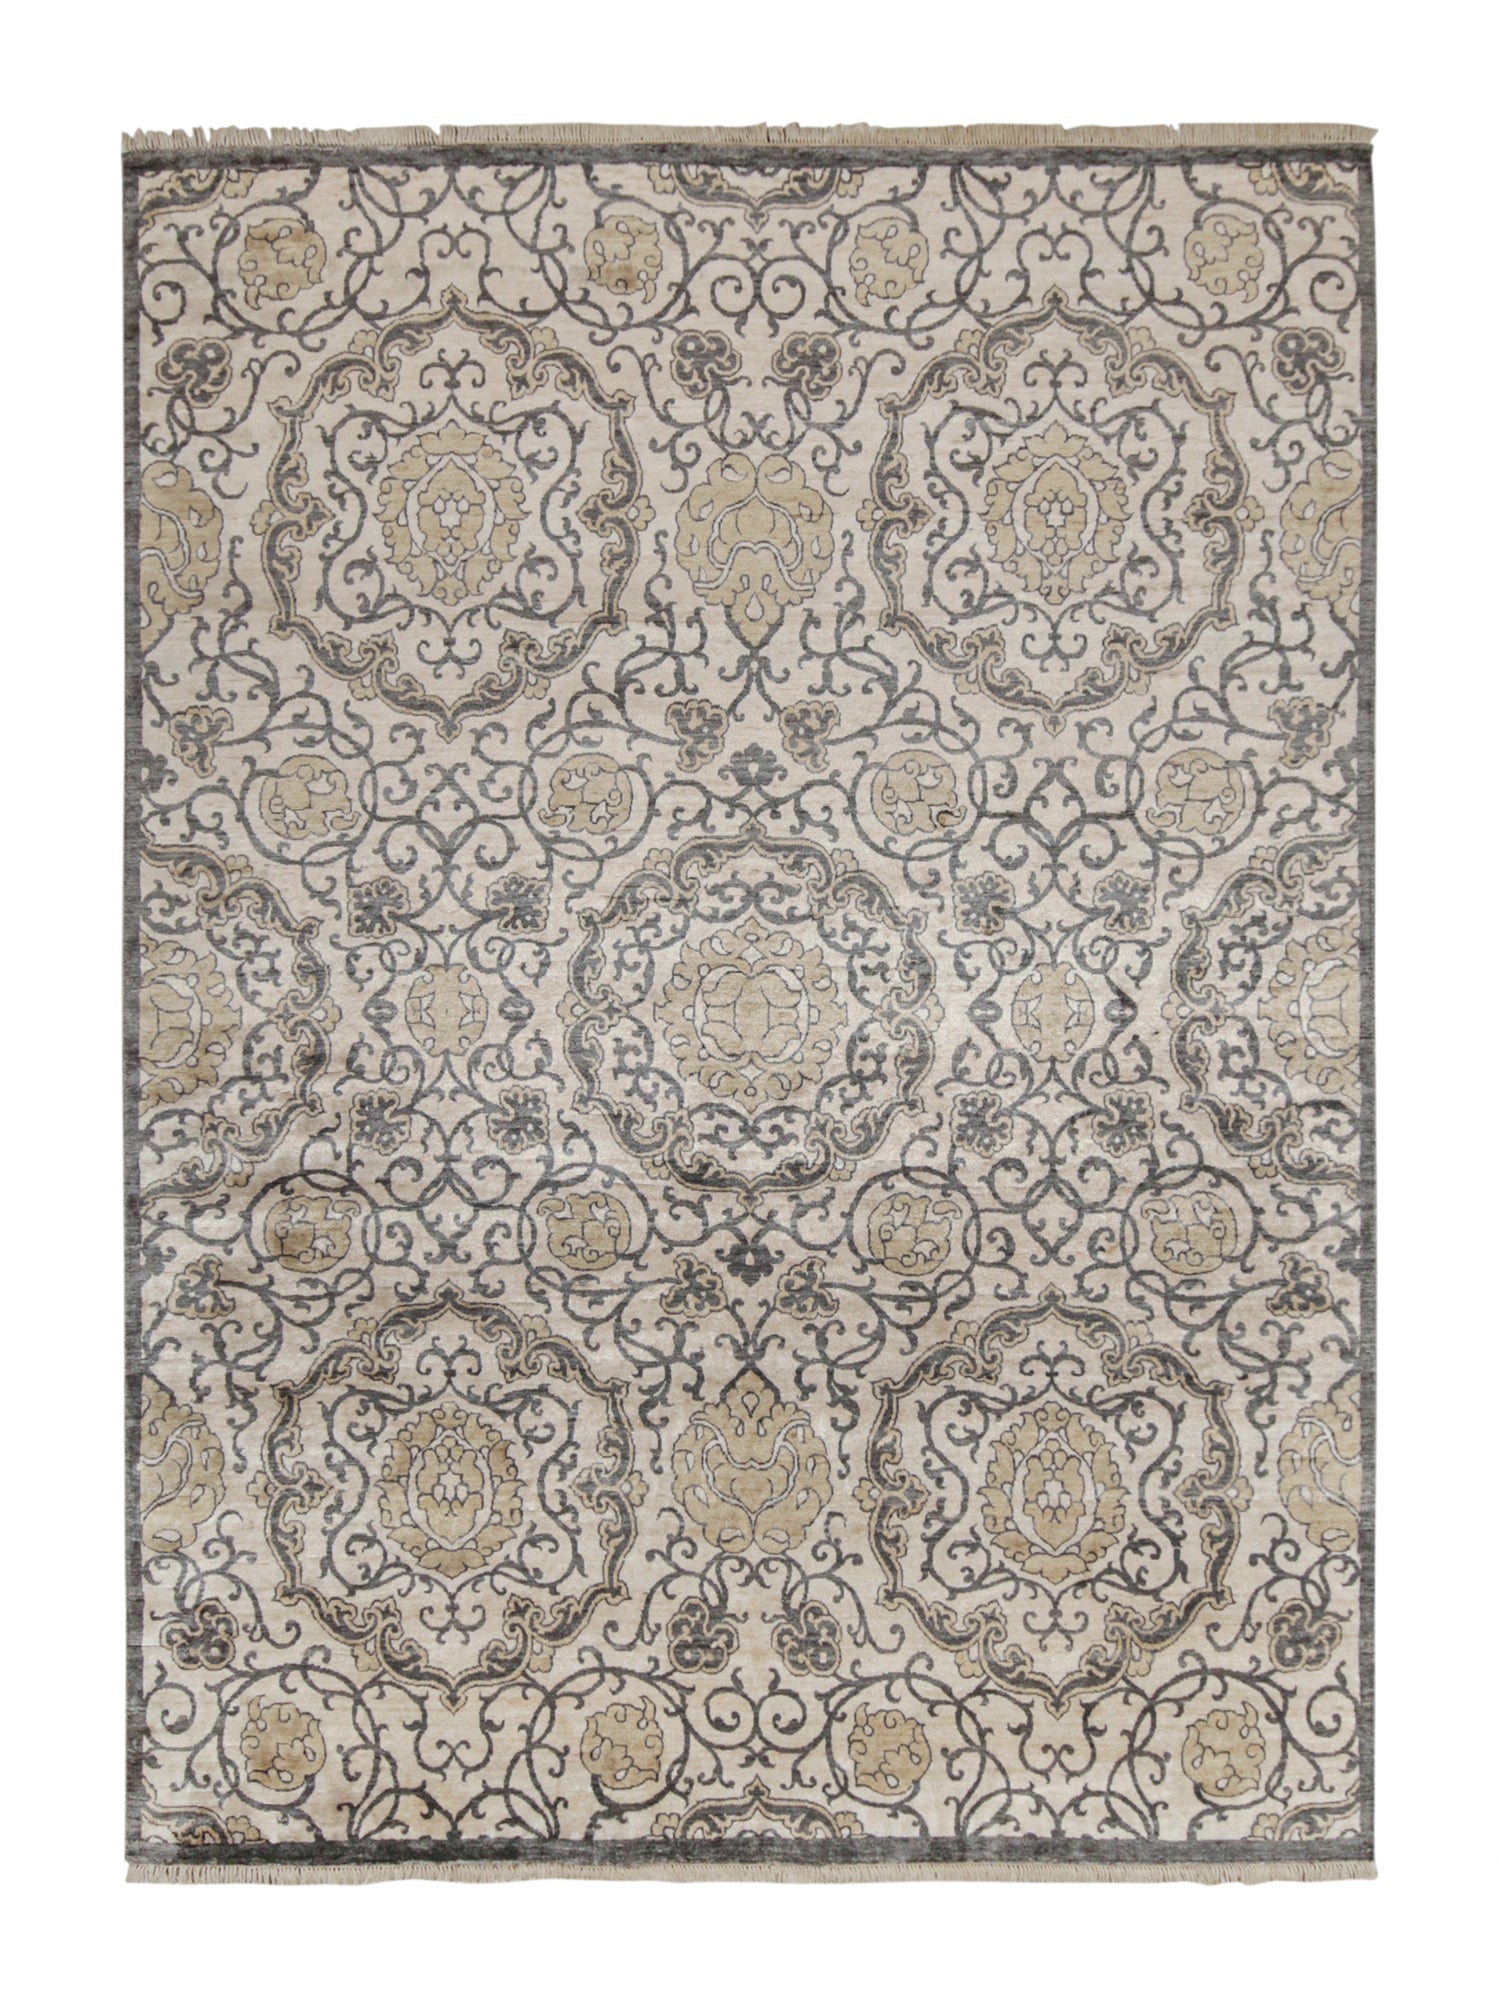 Rug & Kilim’s Classic Style Rug with Gray, Beige and Gold Floral Medallions